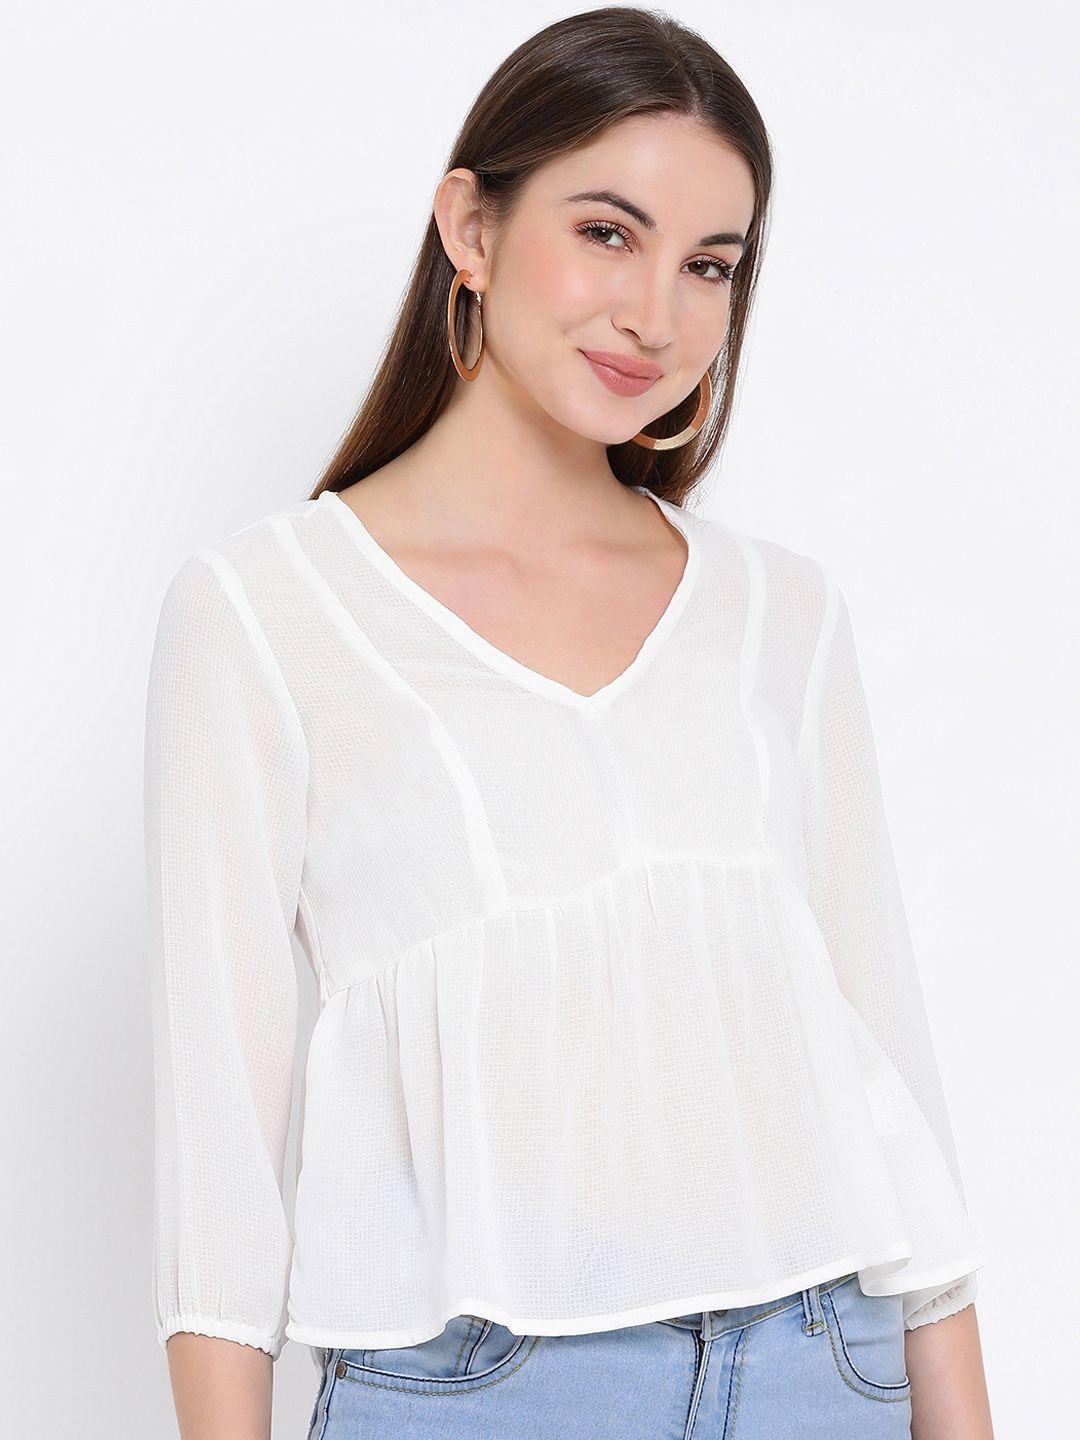 oxolloxo-women-white-solid-empire-top